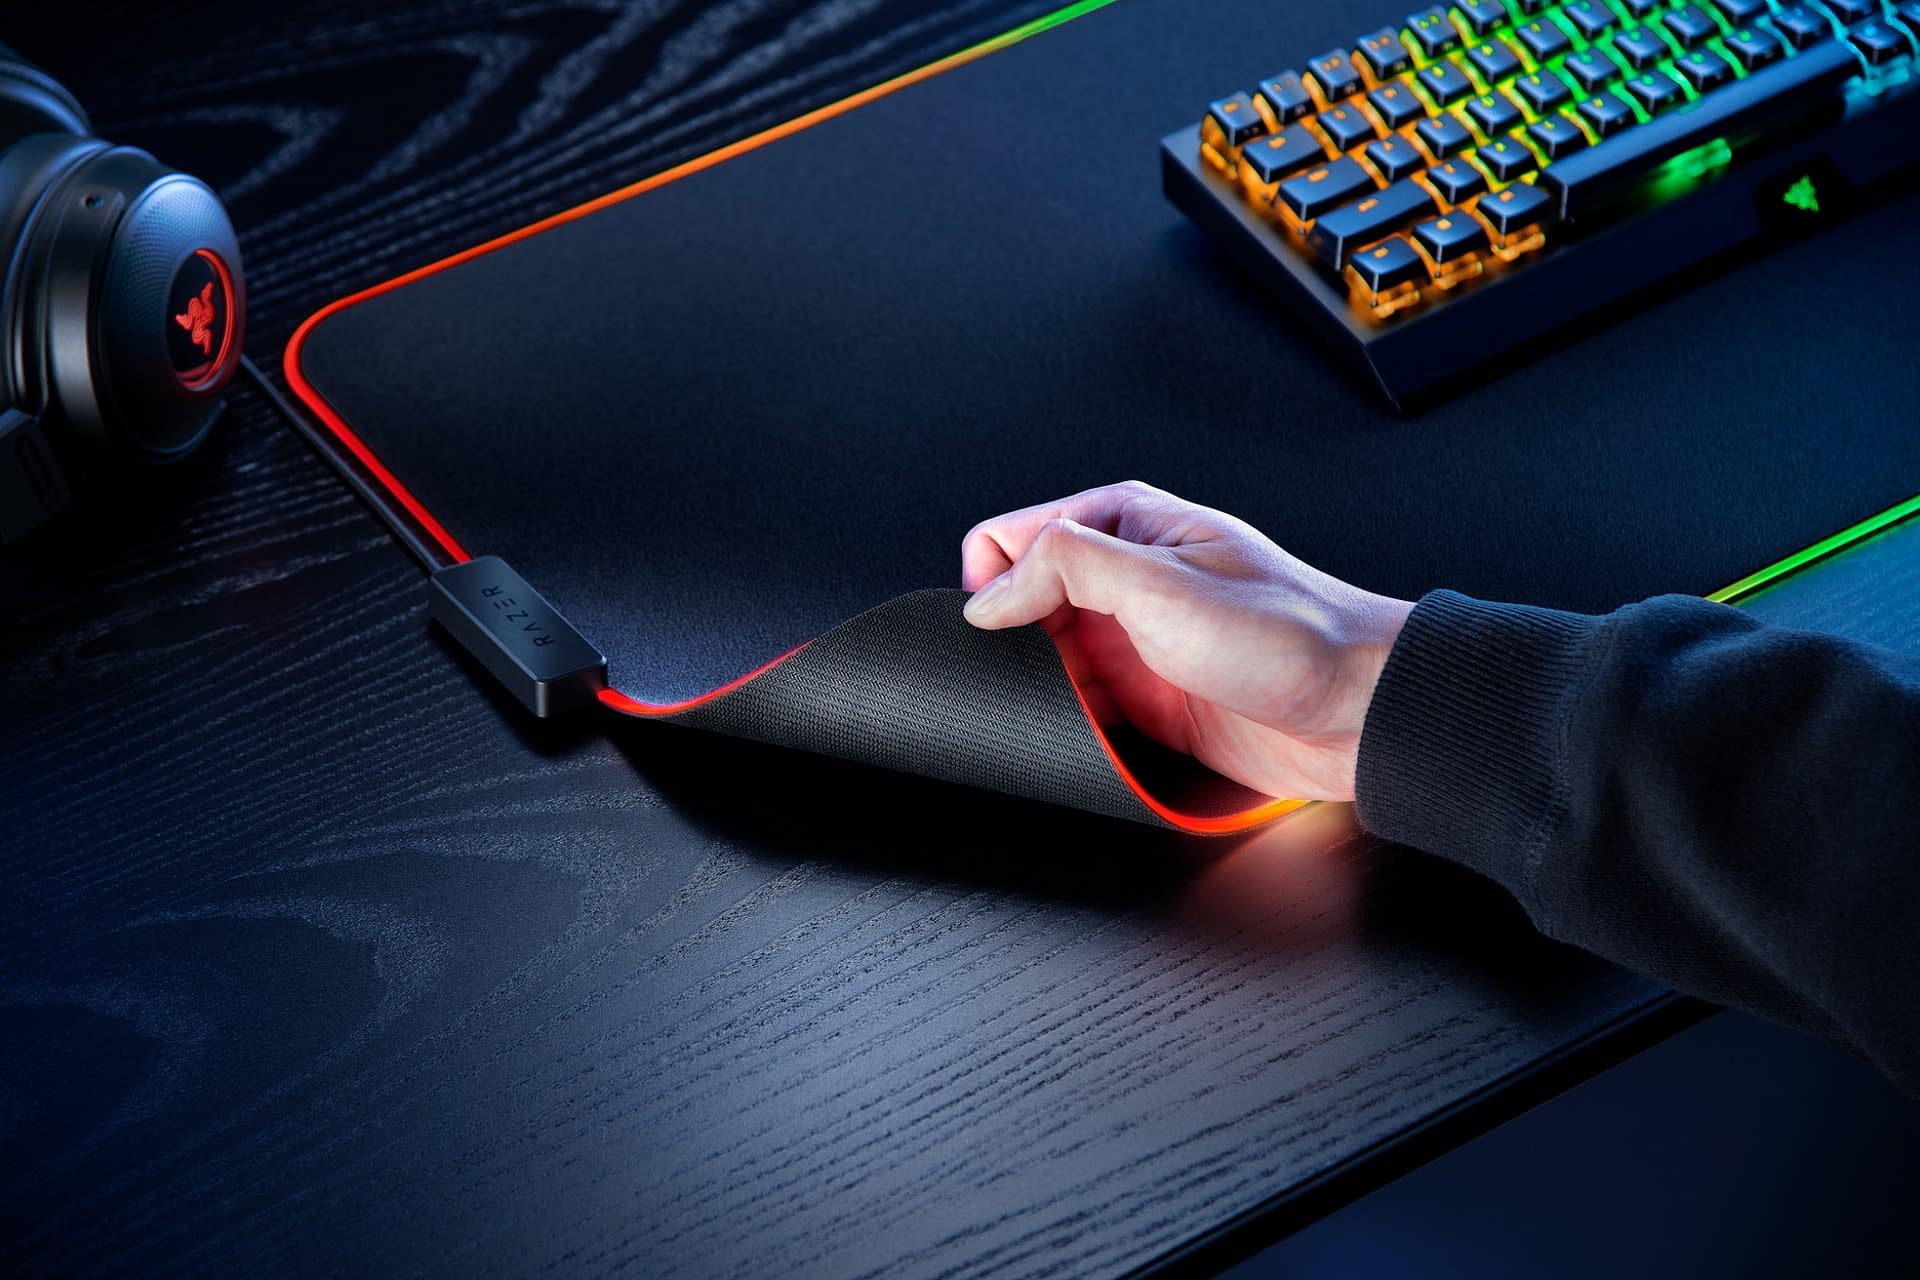 2024 Rgb Gaming Mouse Pad, Led Illuminated Mouse Pad, Non-slip Surface For  Pc And Mac Gamers